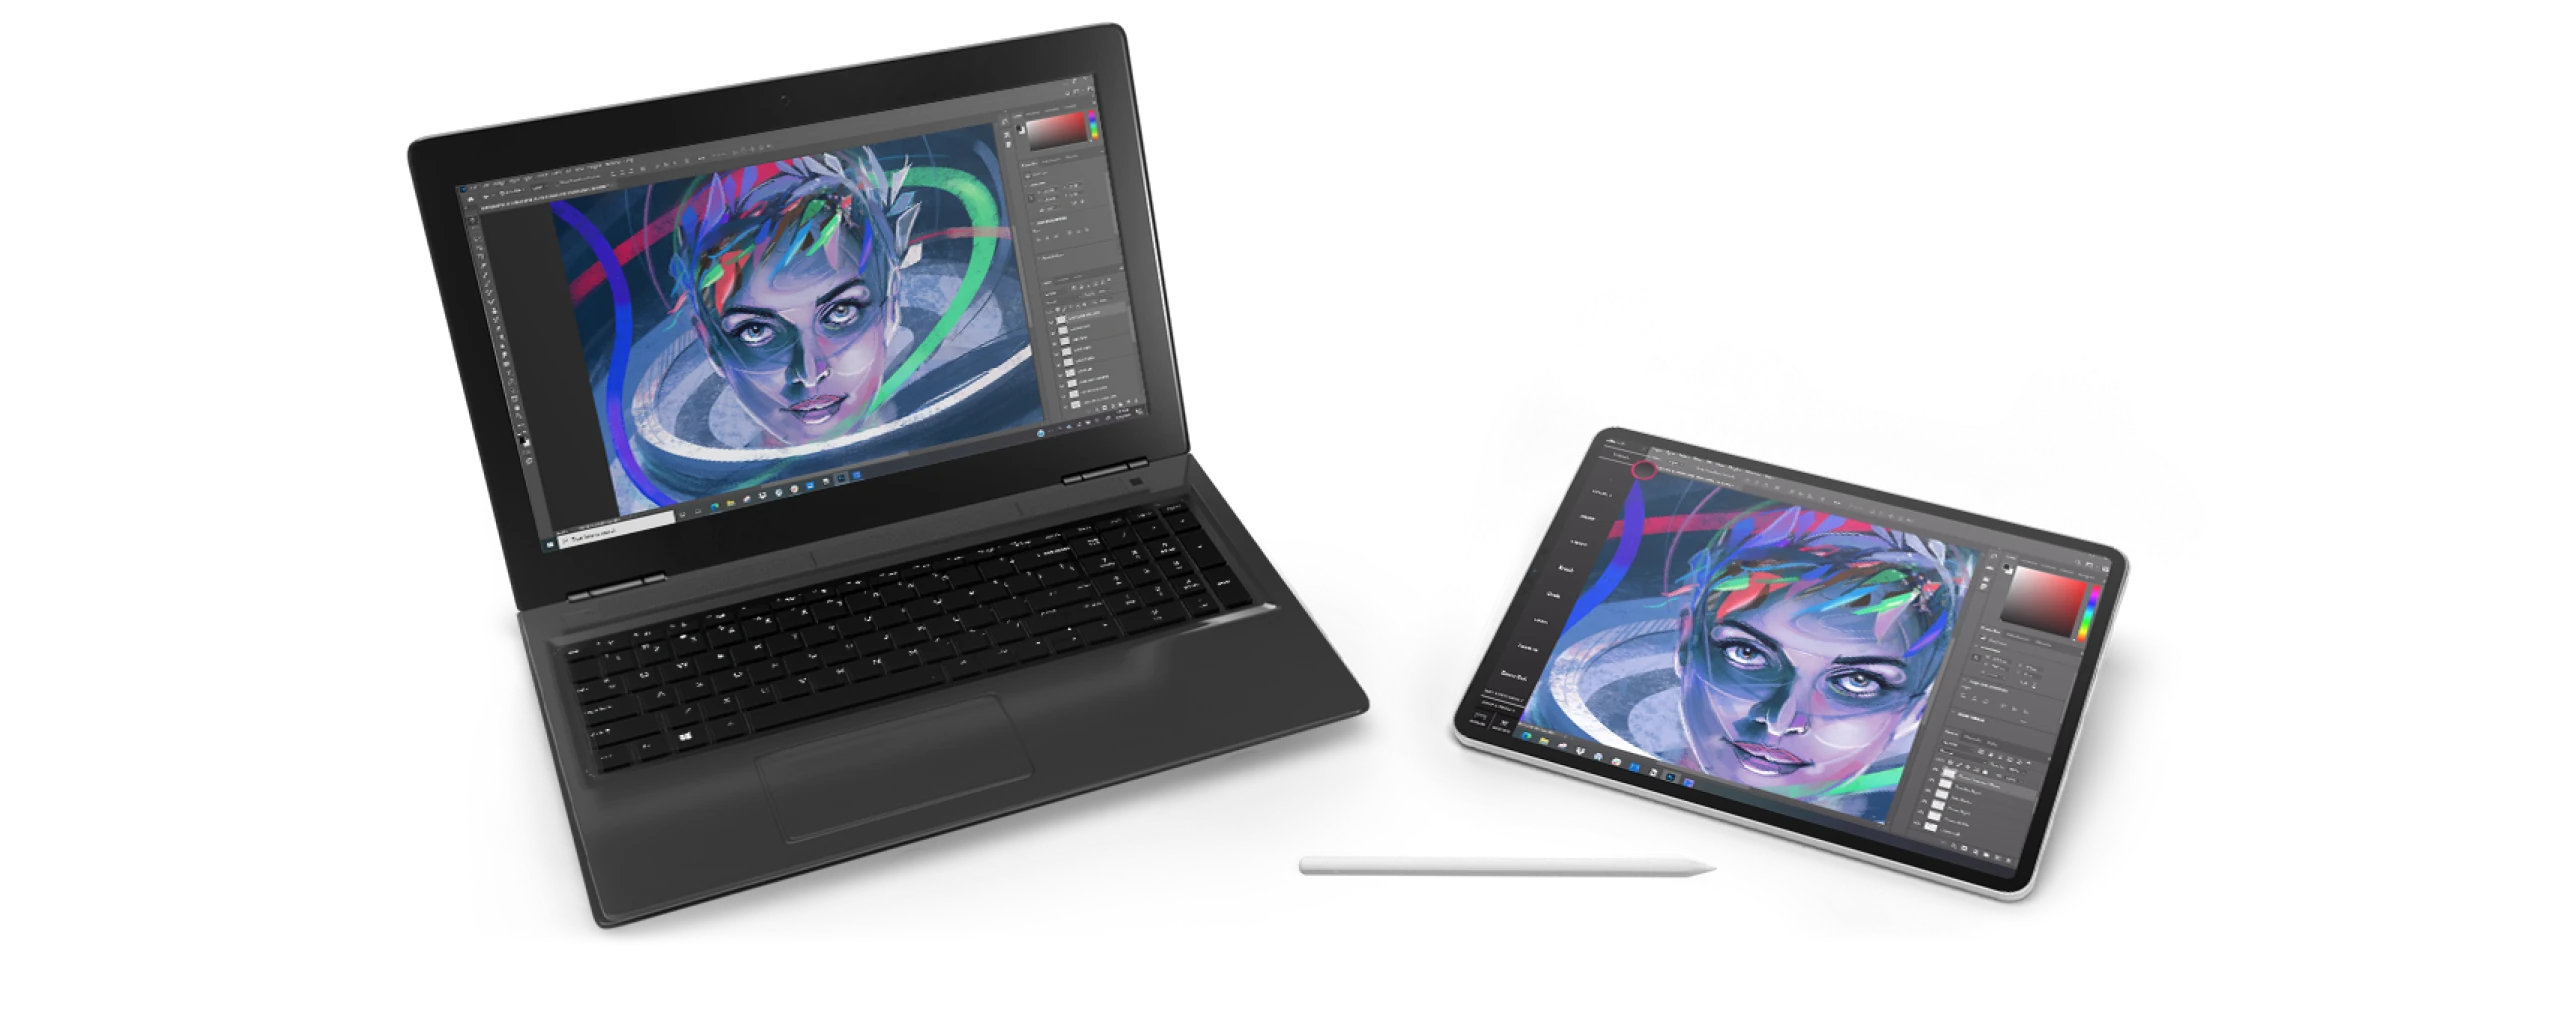 A PC and iPad next to each other with an illustration of a woman on each device